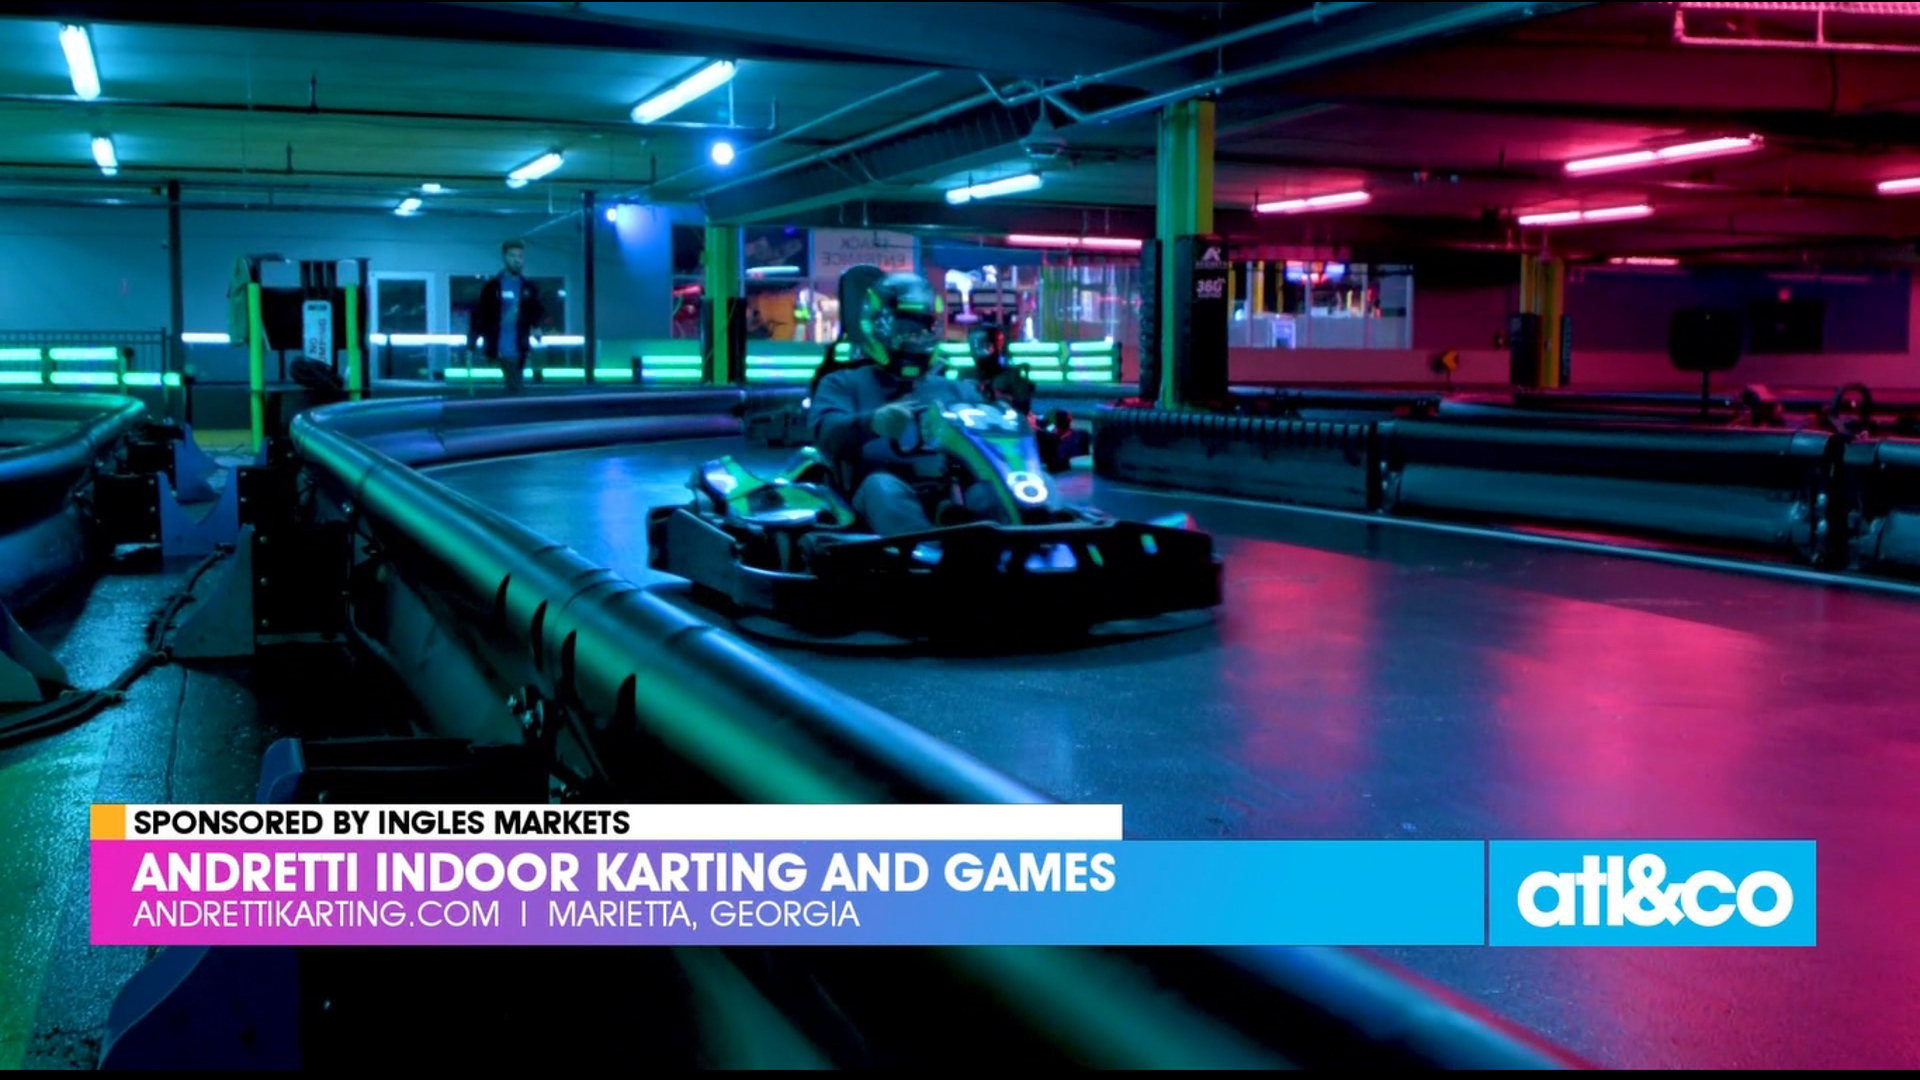 Excitement at every turn! Explore Atlanta's Andretti Indoor Karting and Games with our friends at Ingles Markets.